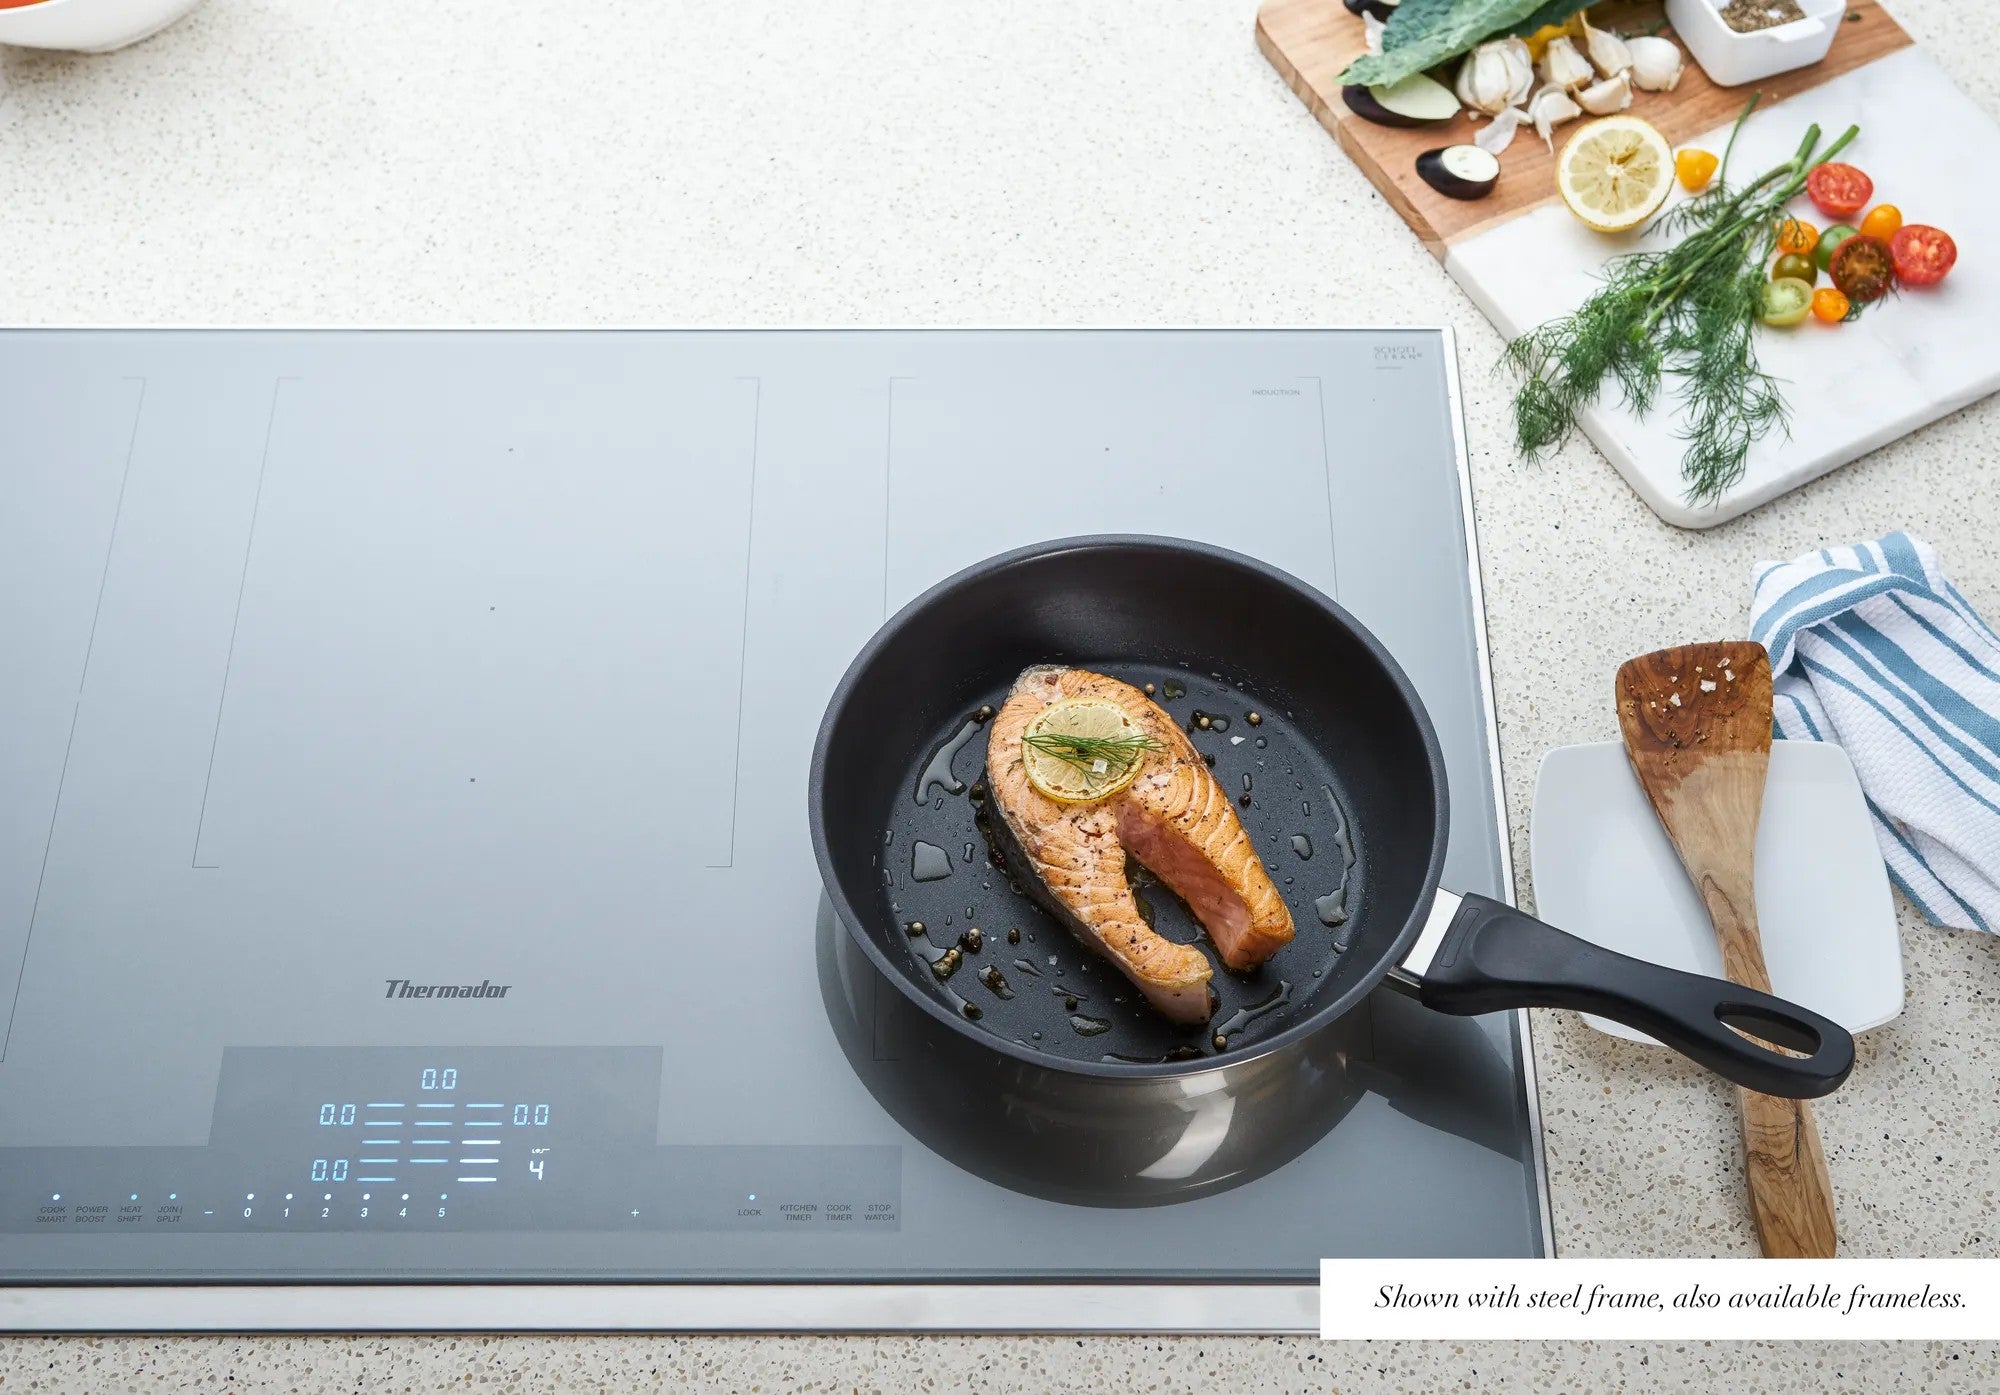 Thermador - 37 Inch Induction Cooktop in Silver - CIT367YM